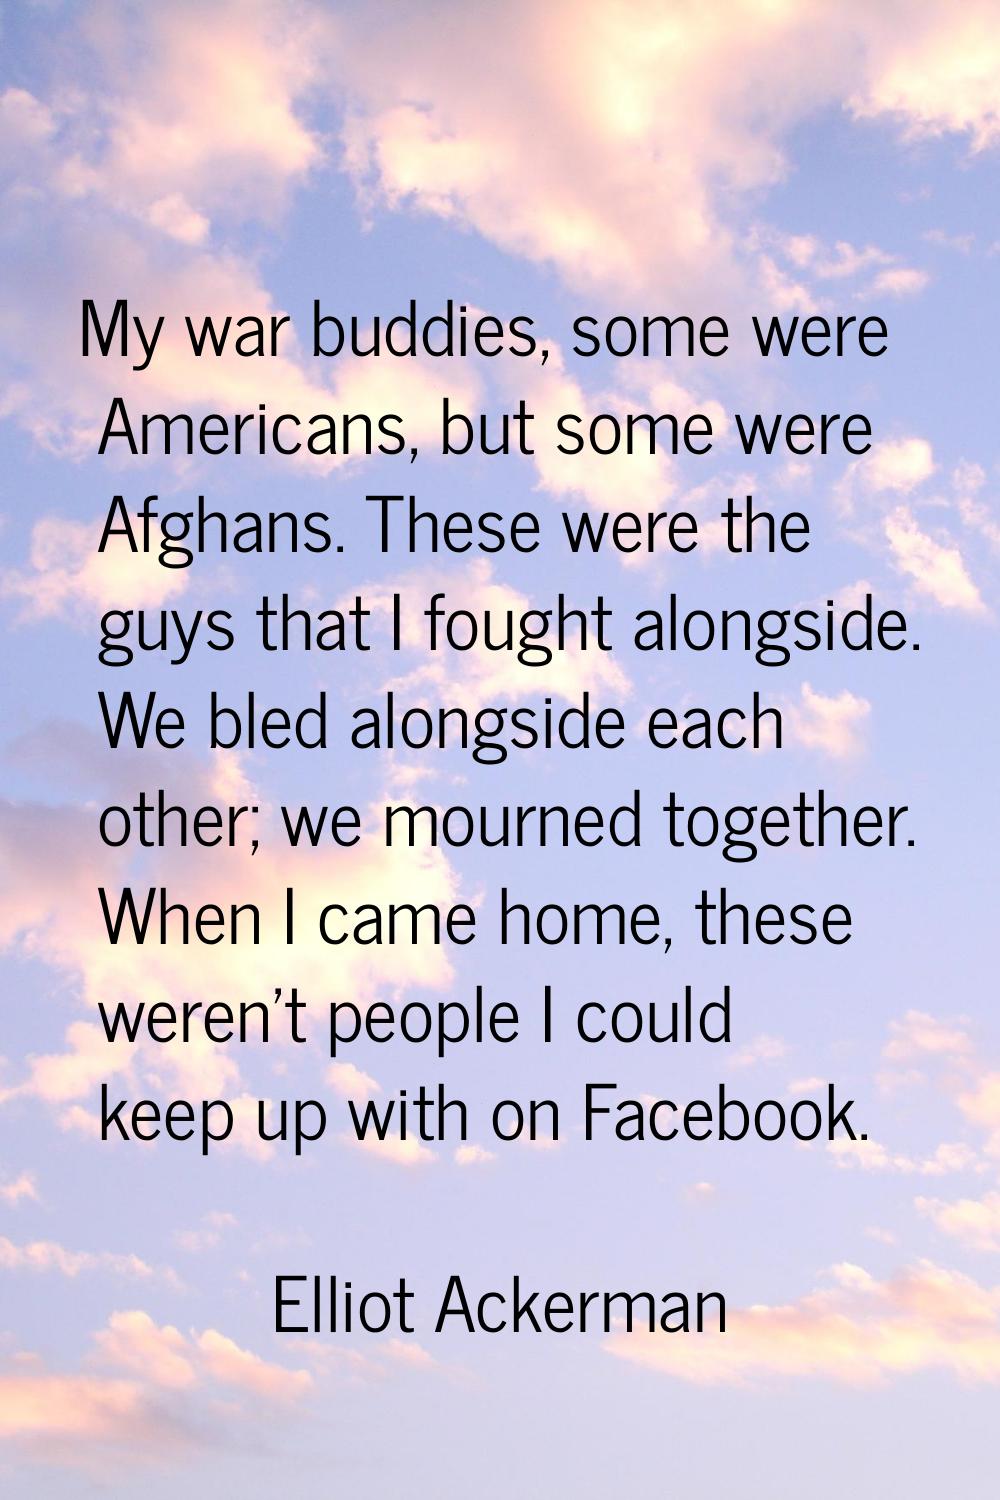 My war buddies, some were Americans, but some were Afghans. These were the guys that I fought along